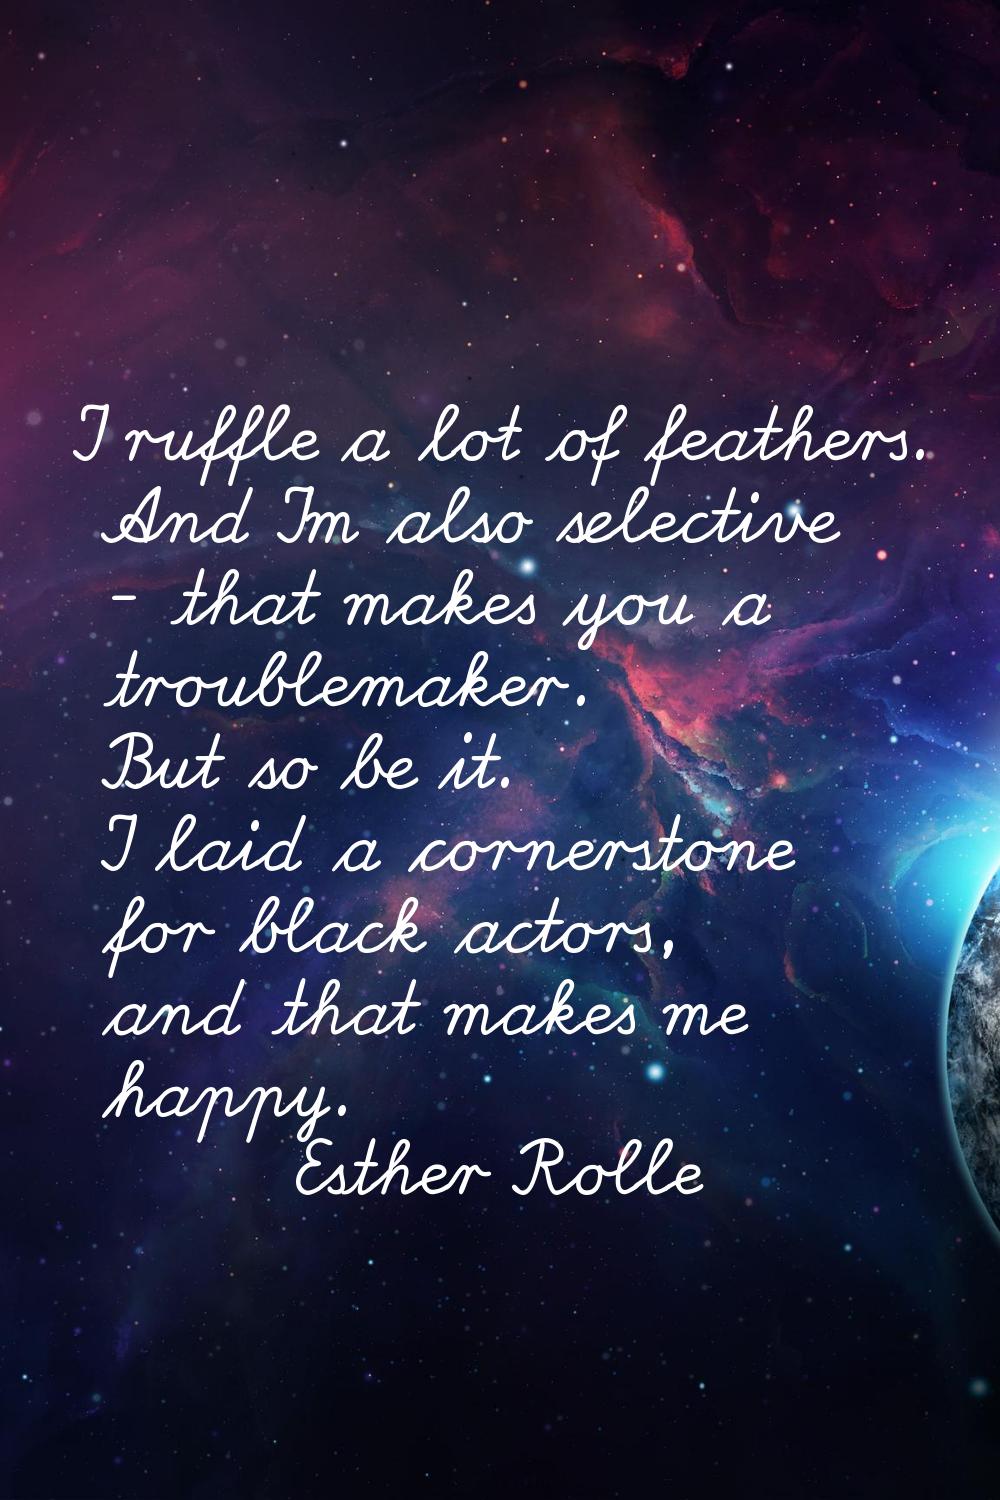 I ruffle a lot of feathers. And I'm also selective - that makes you a troublemaker. But so be it. I